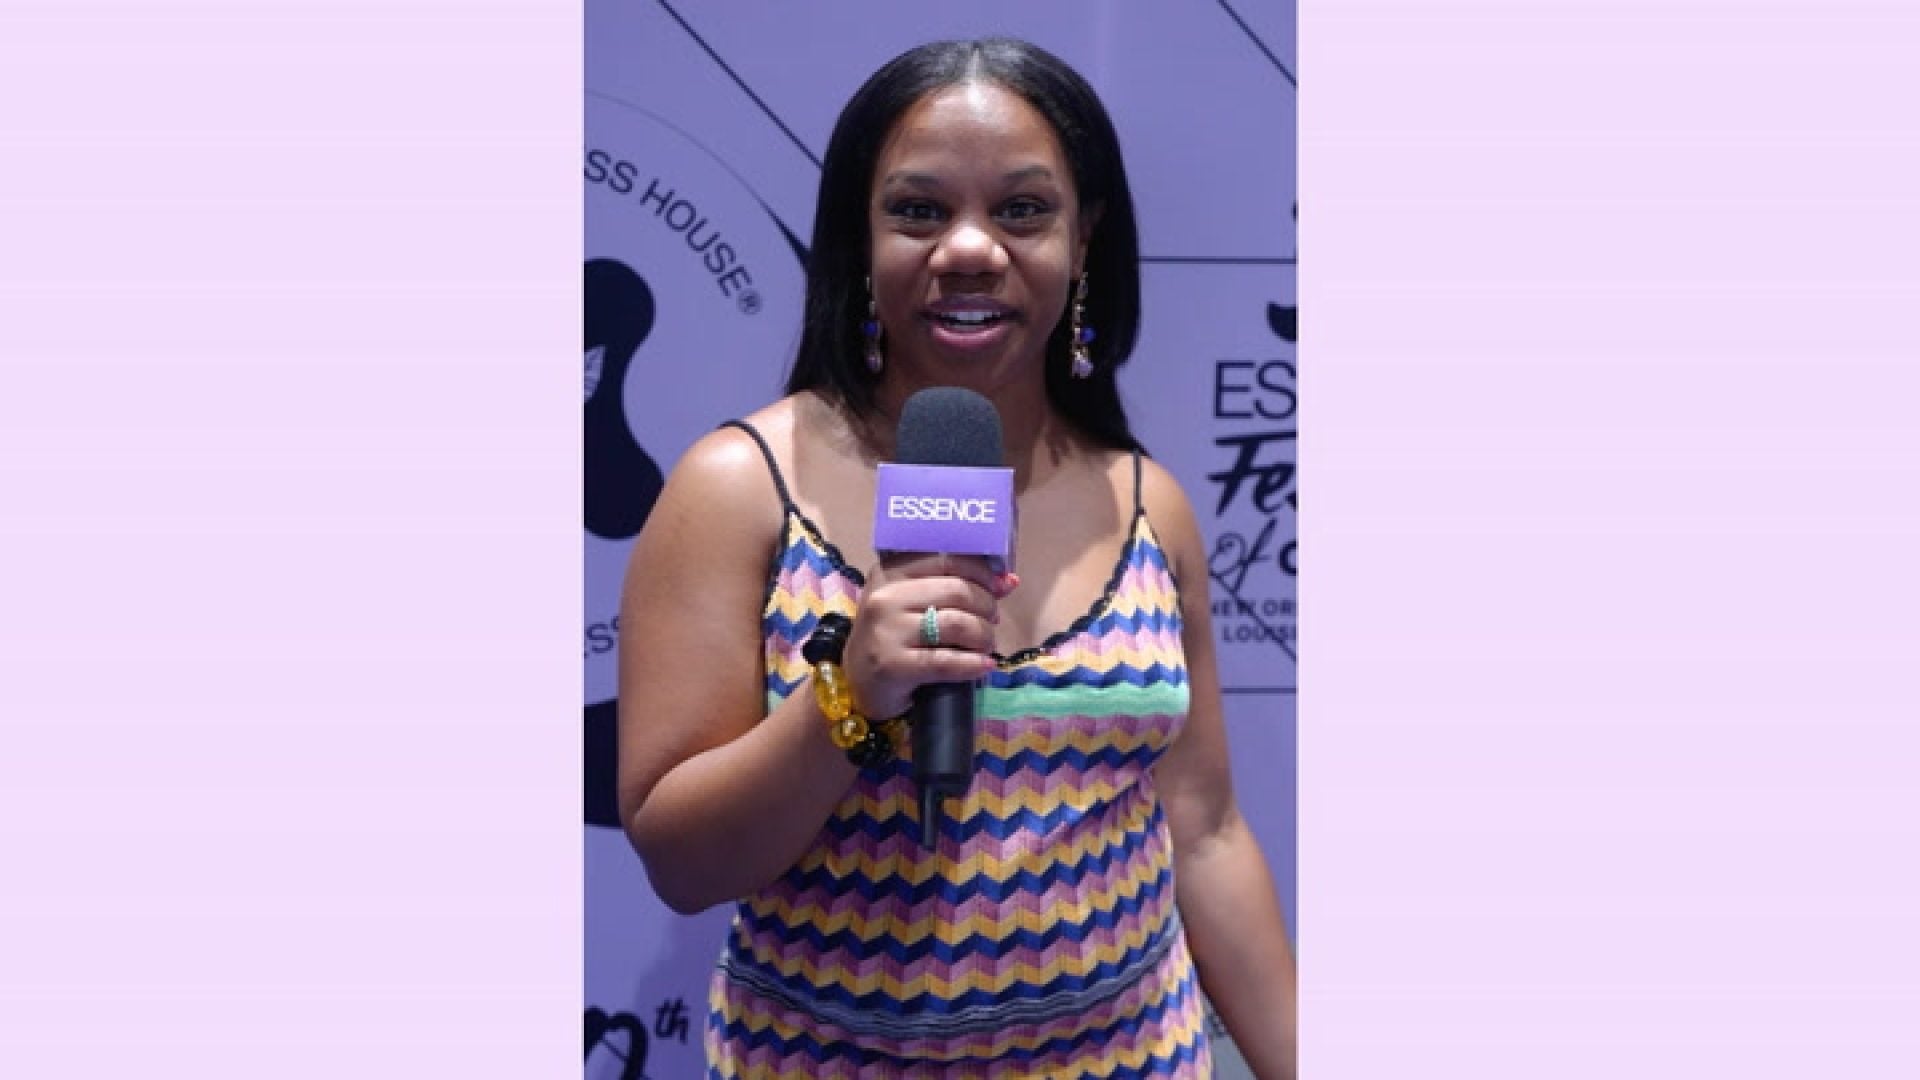 WATCH: Take Care Sis At Essence Festival